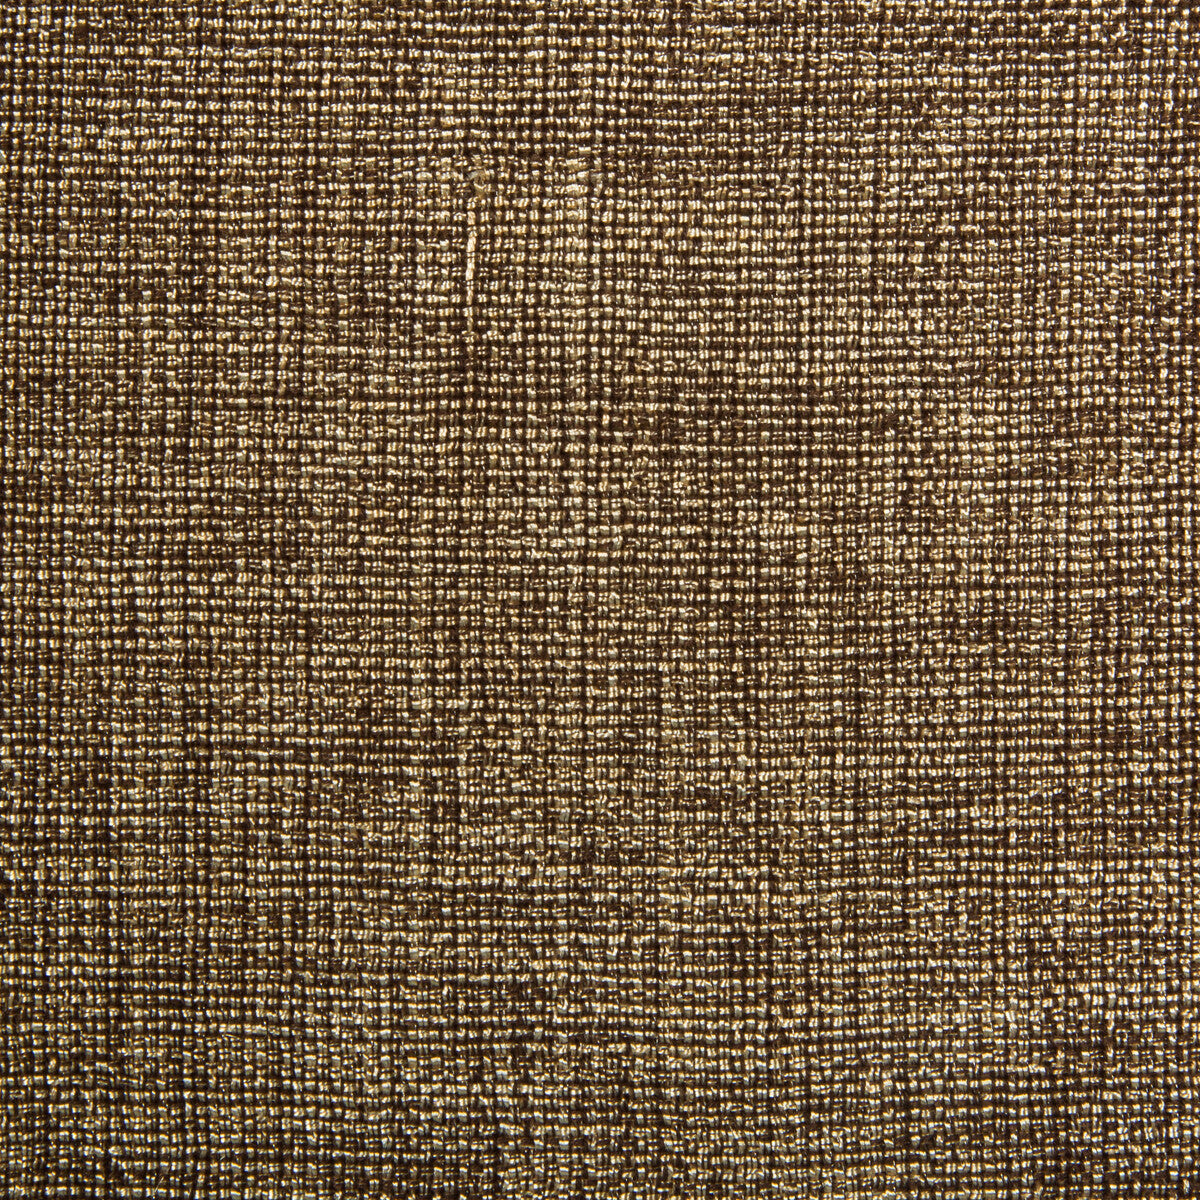 Kravet Contract fabric in 4458-1621 color - pattern 4458.1621.0 - by Kravet Contract